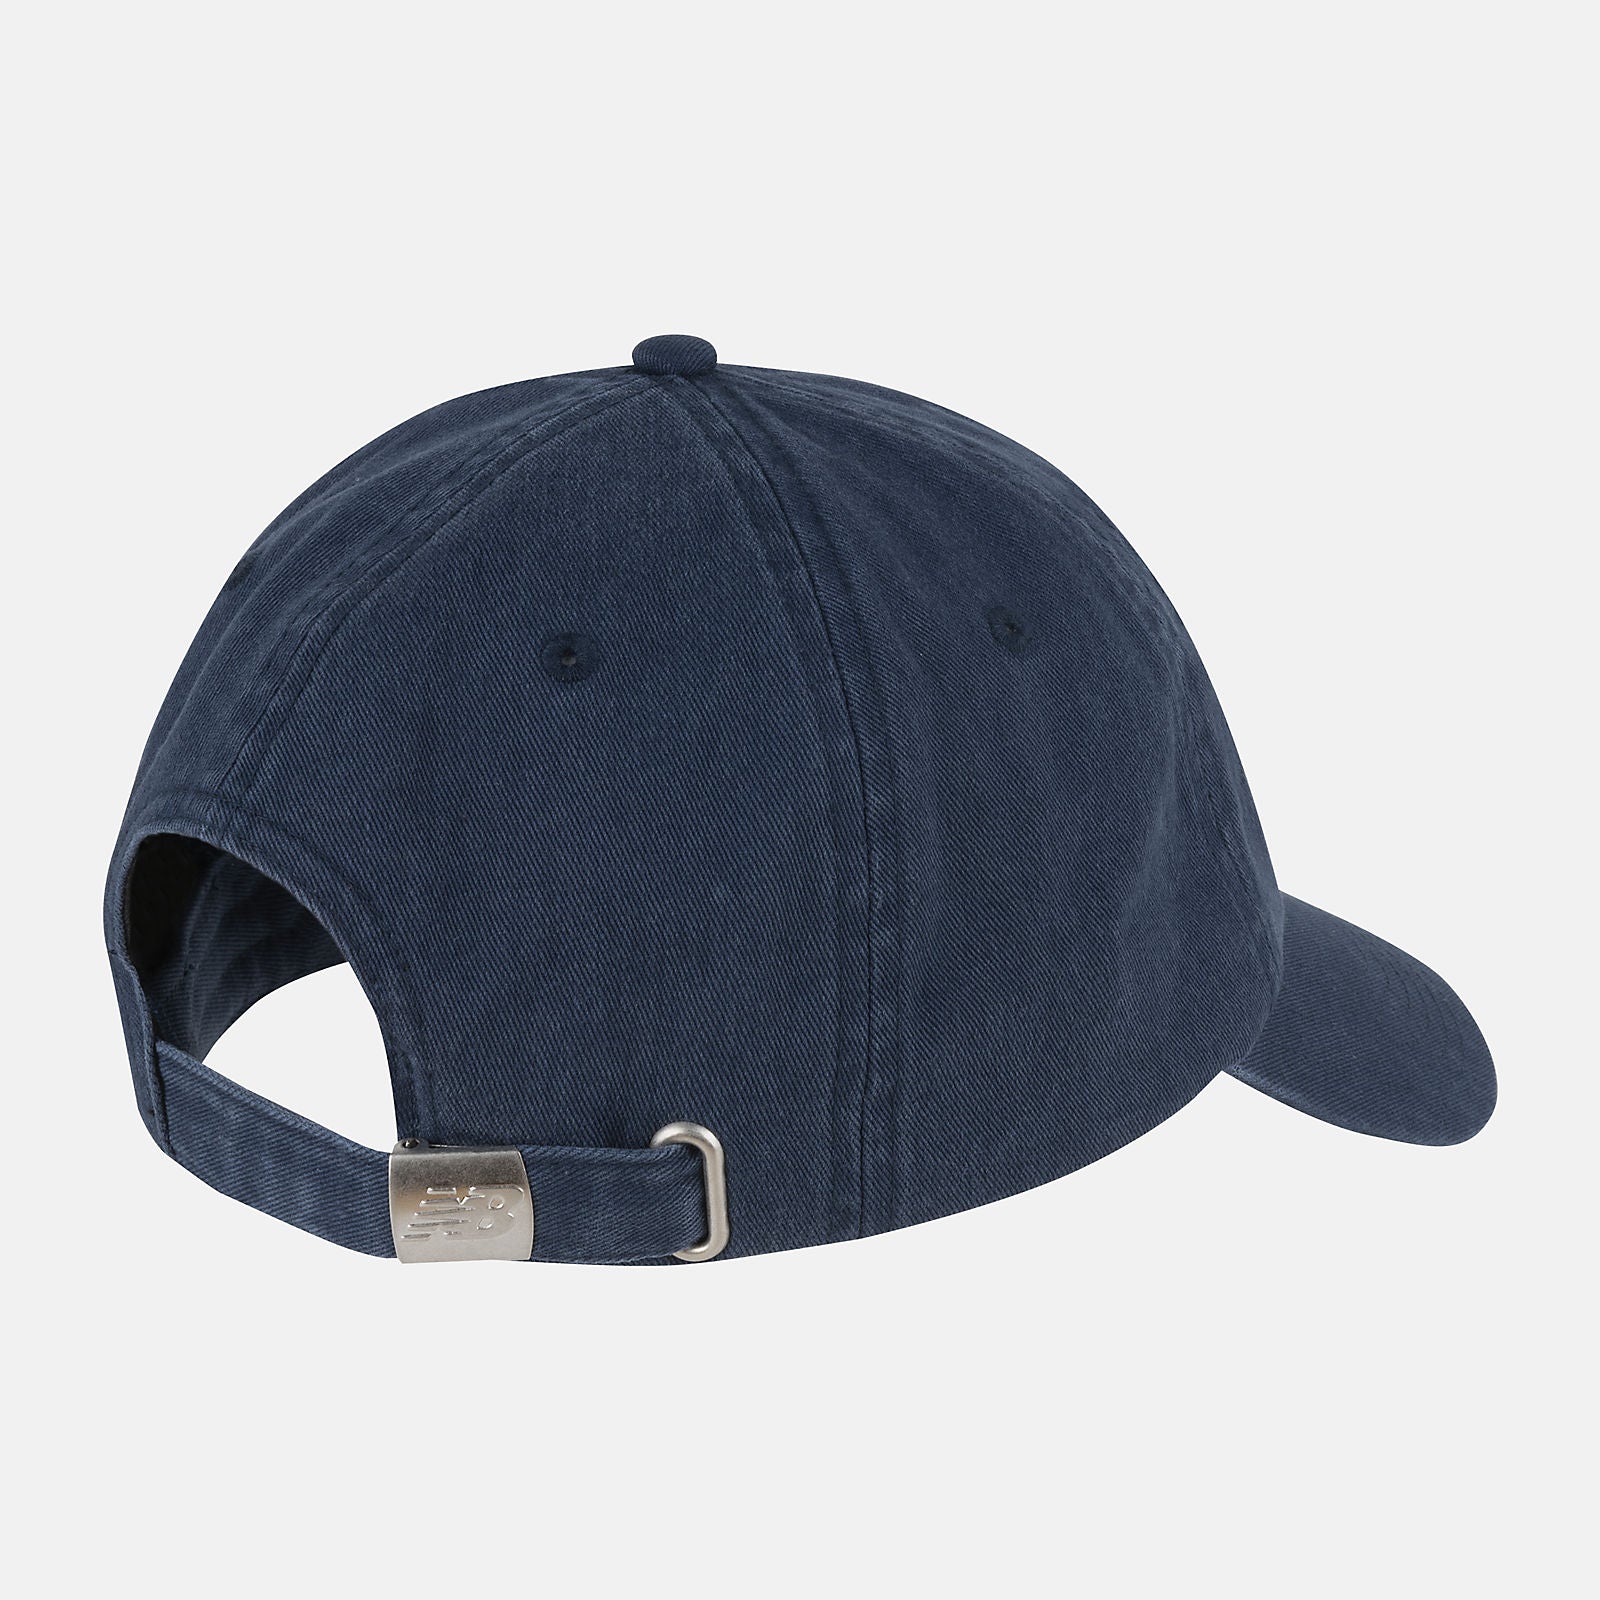 NEW BALANCE NB Logo Hat in NB Navy LAH21002 O/S NB NAVY FROM EIGHTYWINGOLD - OFFICIAL BRAND PARTNER